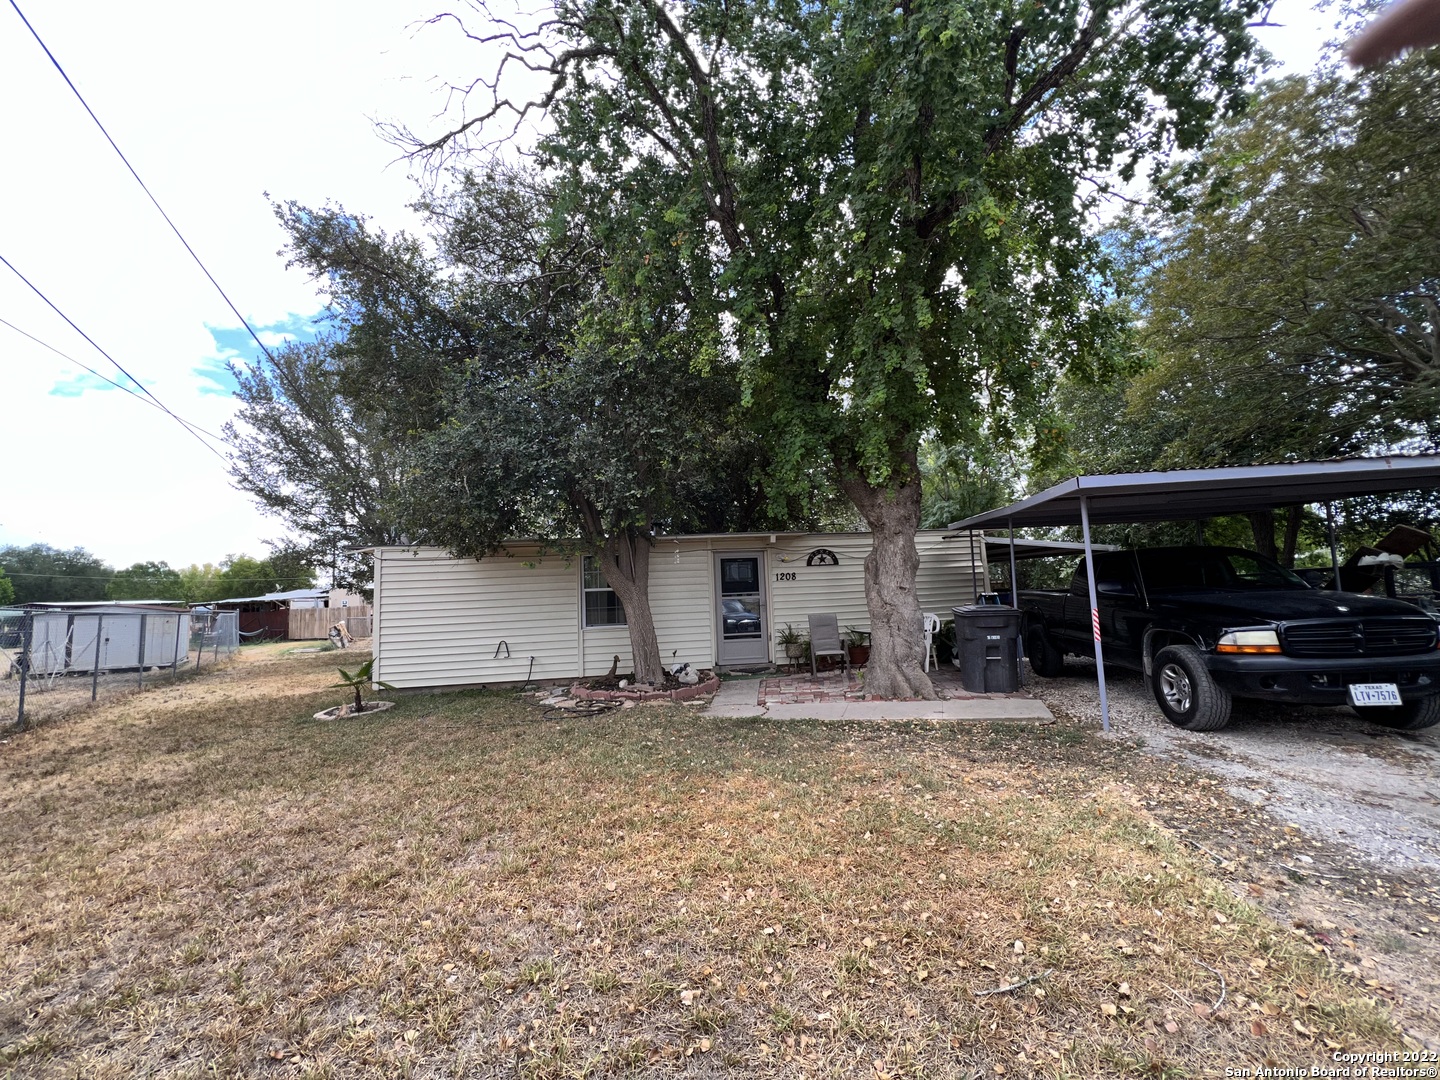 GREAT INVESTMENT OPPORTUNITY!! Excellent location in the heart of the Missions, 10 minutes from Downtown San Antonio, near Walmart, Home Depot, and many other stores. The property next to it is also for sale by the same owner, in case you have relatives you would like as neighbors!